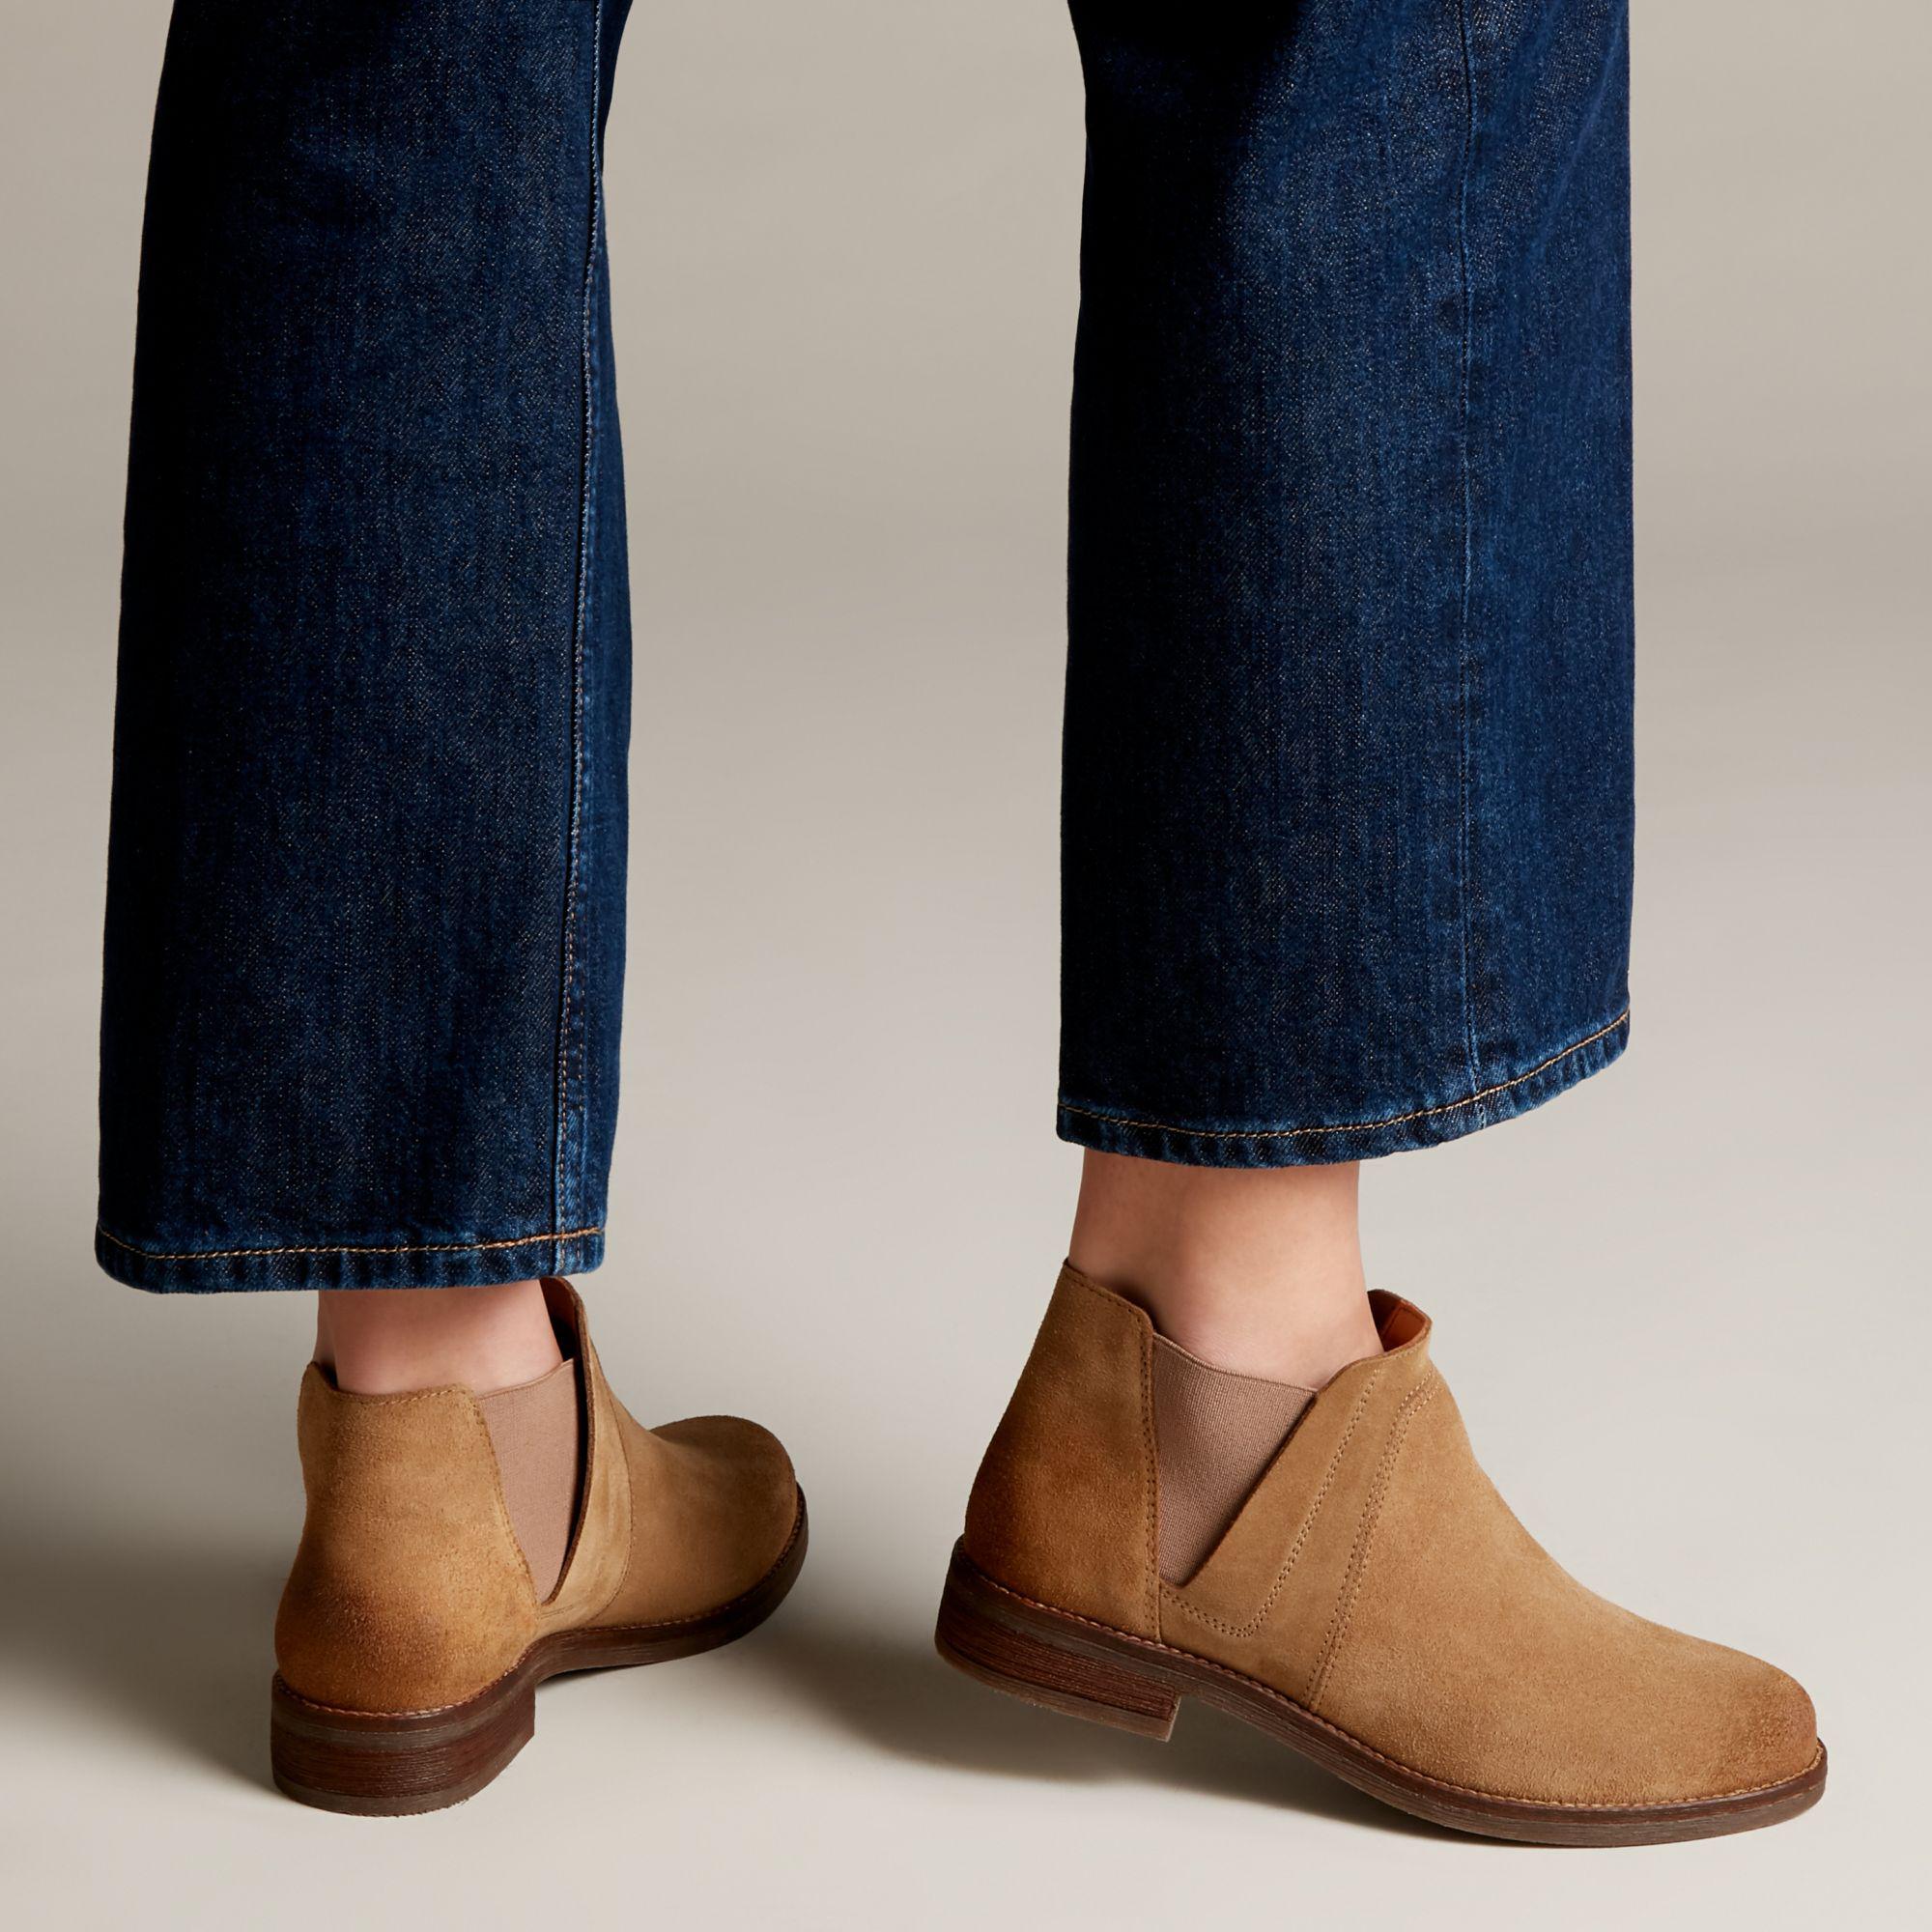 Clarks Demi Boots Hotsell, 56% OFF | www.velocityusa.com